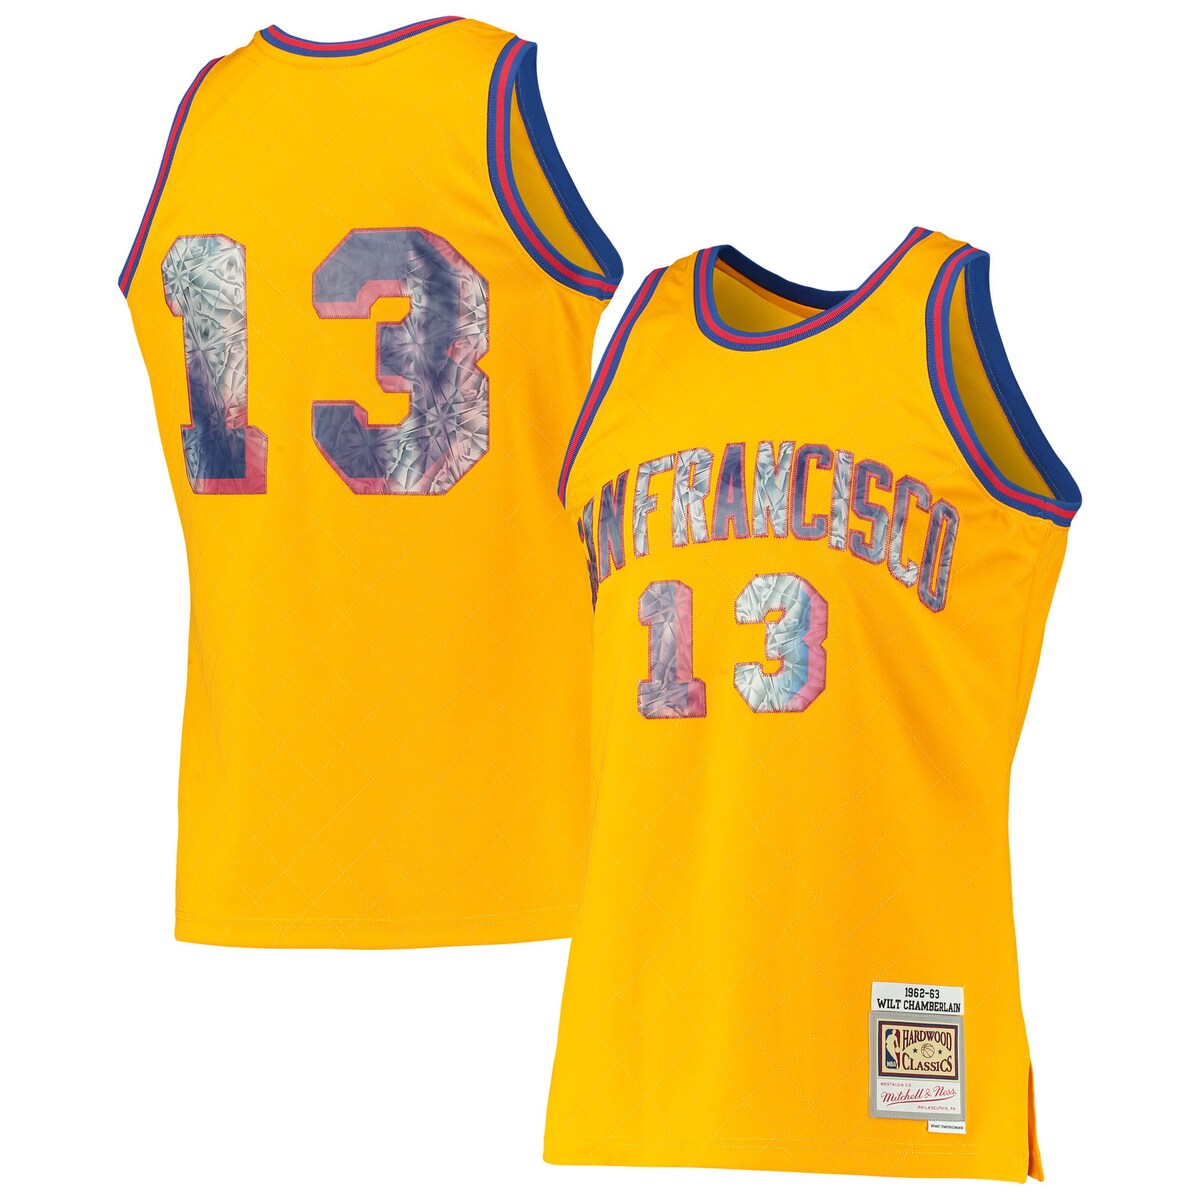 For the NBA's 75th anniversary, throw it back to one of the stars of the San Francisco Warriors with this Wilt Chamberlain Hardwood Classics Diamond Swingman jersey from Mitchell & Ness. It features faux diamond details for the league's big milestone and that old-school design Wilt Chamberlain used to wear back in the day. This authentic piece of gear is a great way to mesh past and present as you get fired up for game day.Swingman ThrowbackOfficially licensedSleevelessMaterial: 100% PolyesterMachine wash, line dryBrand: Mitchell & NessCrew neckStitched holographic applique with faux diamond patternImportedStitched designStraight hemline with side splitsWoven jock tag at hem